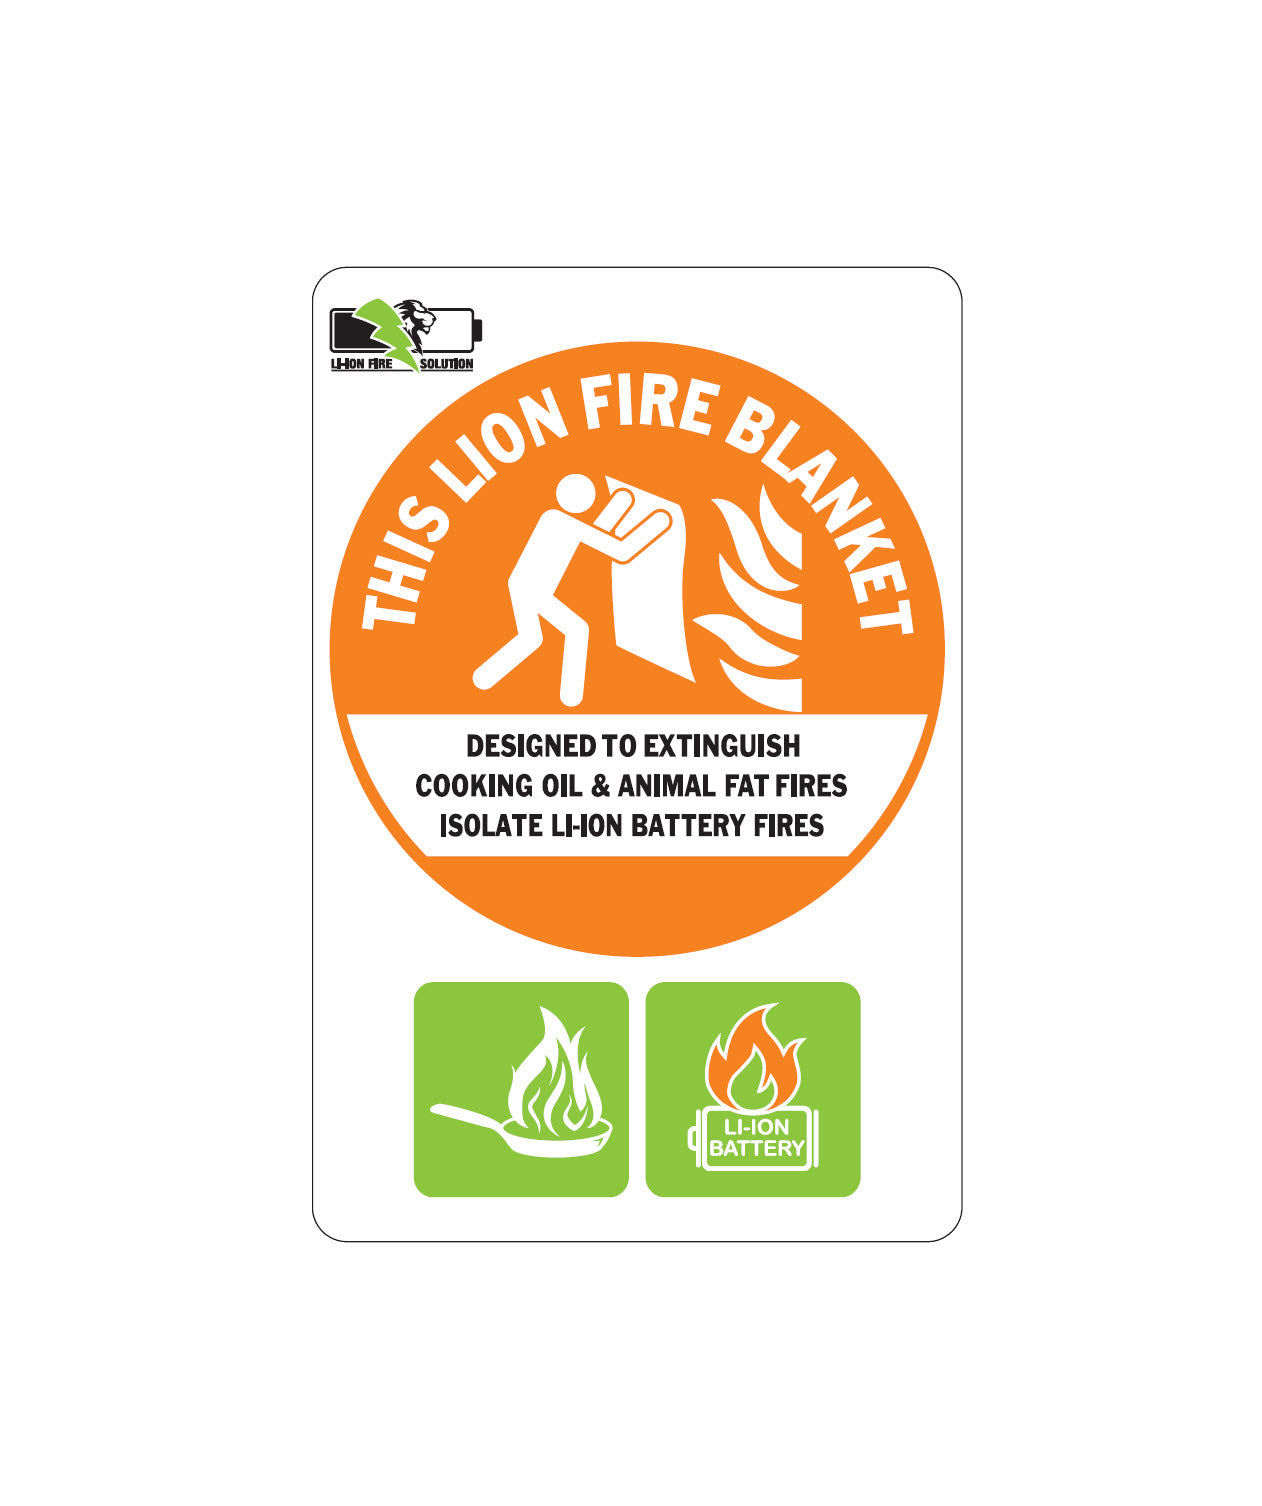 Lithium-Ion Battery Fire blanket location sign